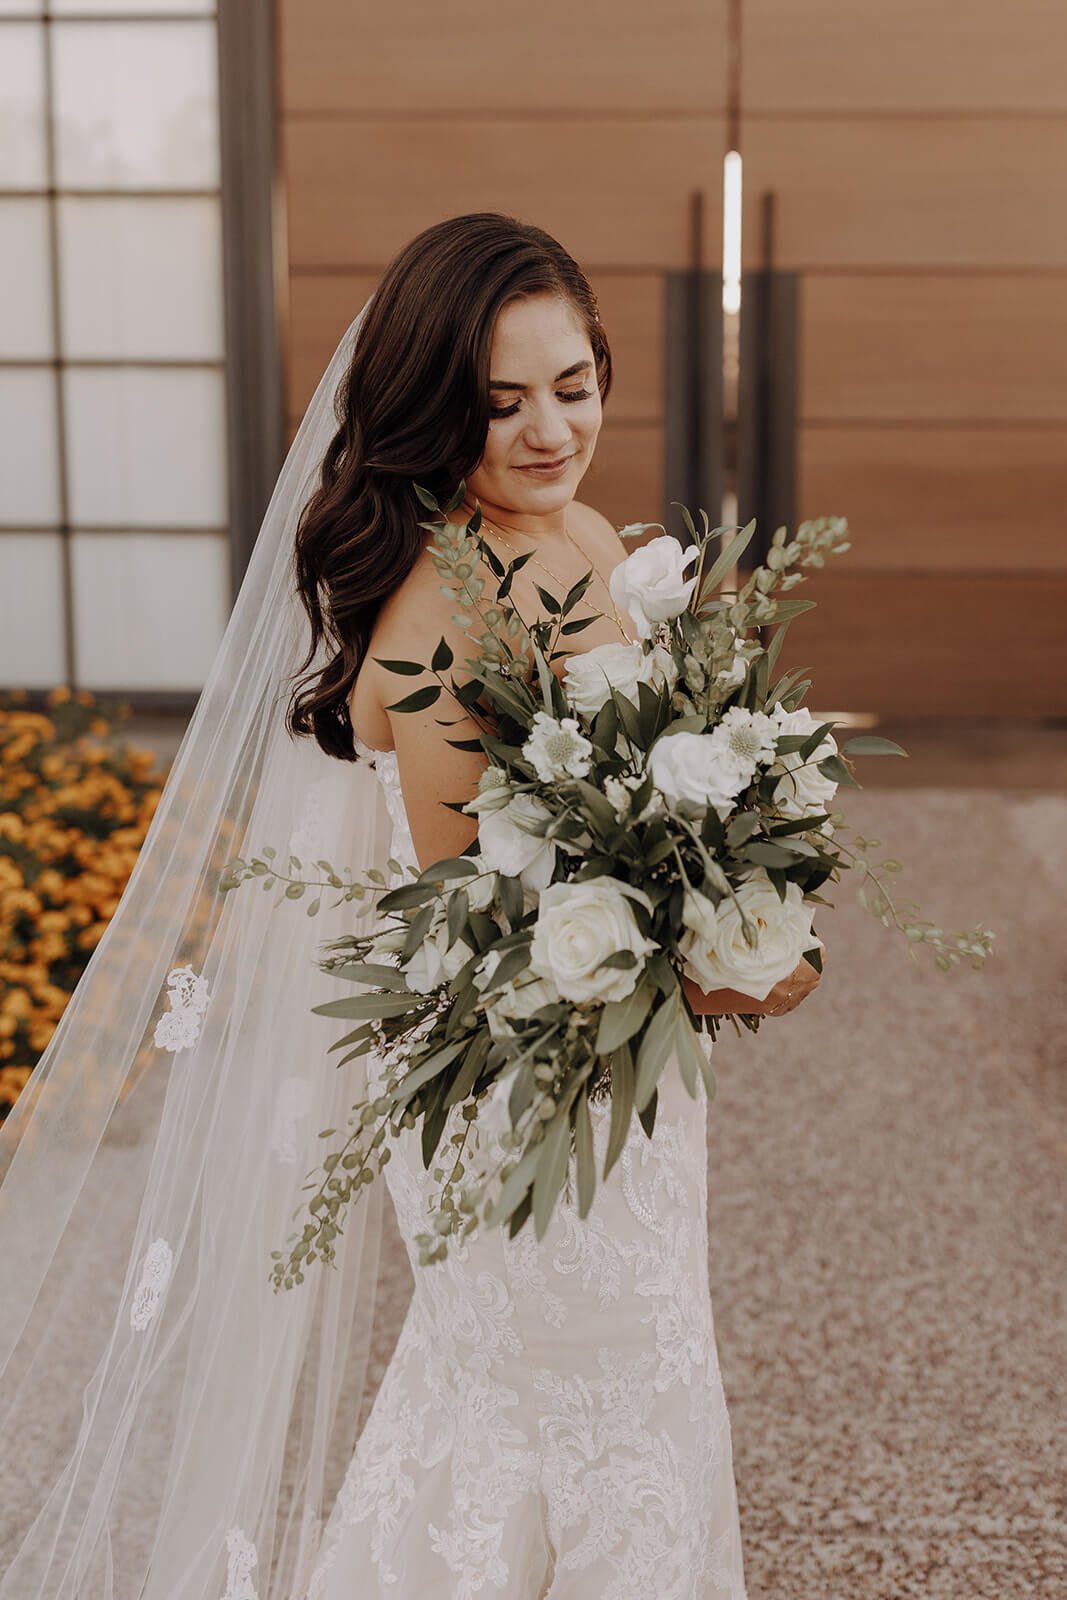 Bride wearing white dress with veil and holding white and green floral bouquet